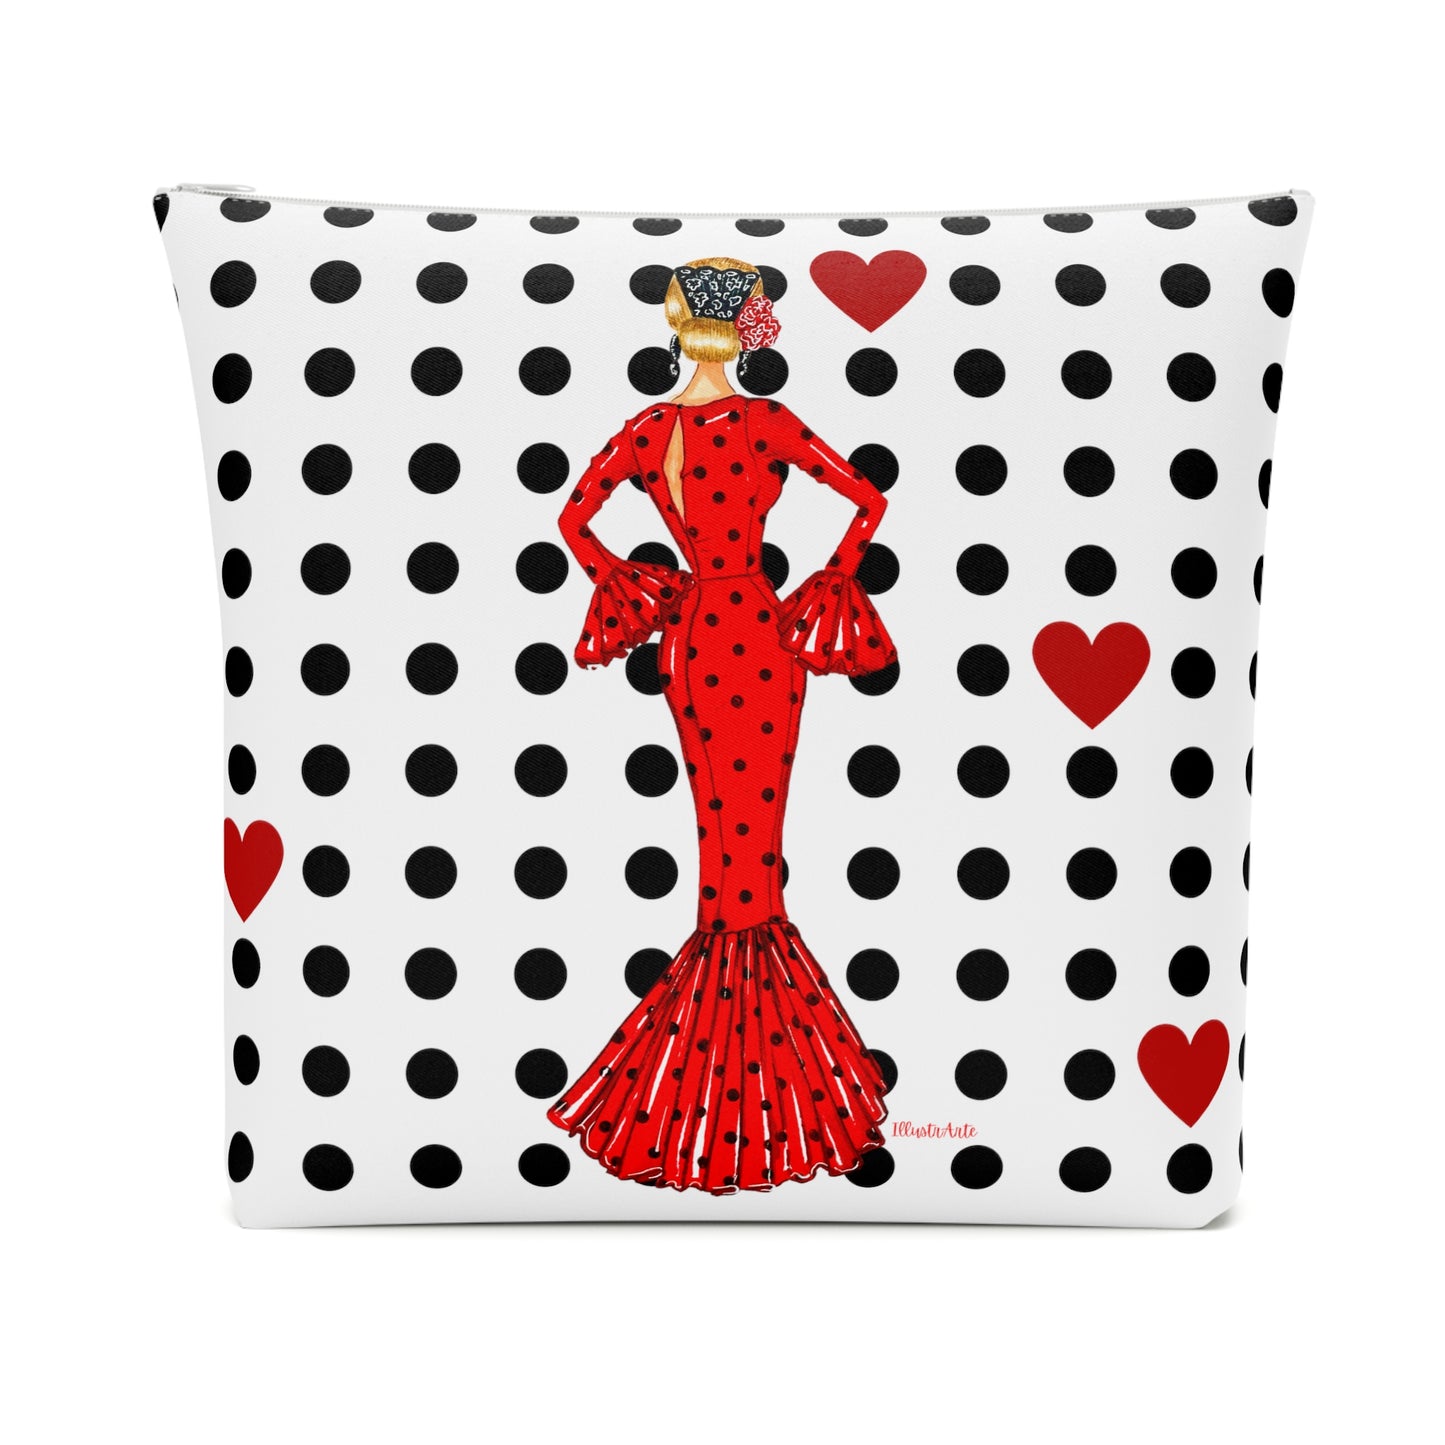 a red and black polka dot pillow with a lady in a red dress